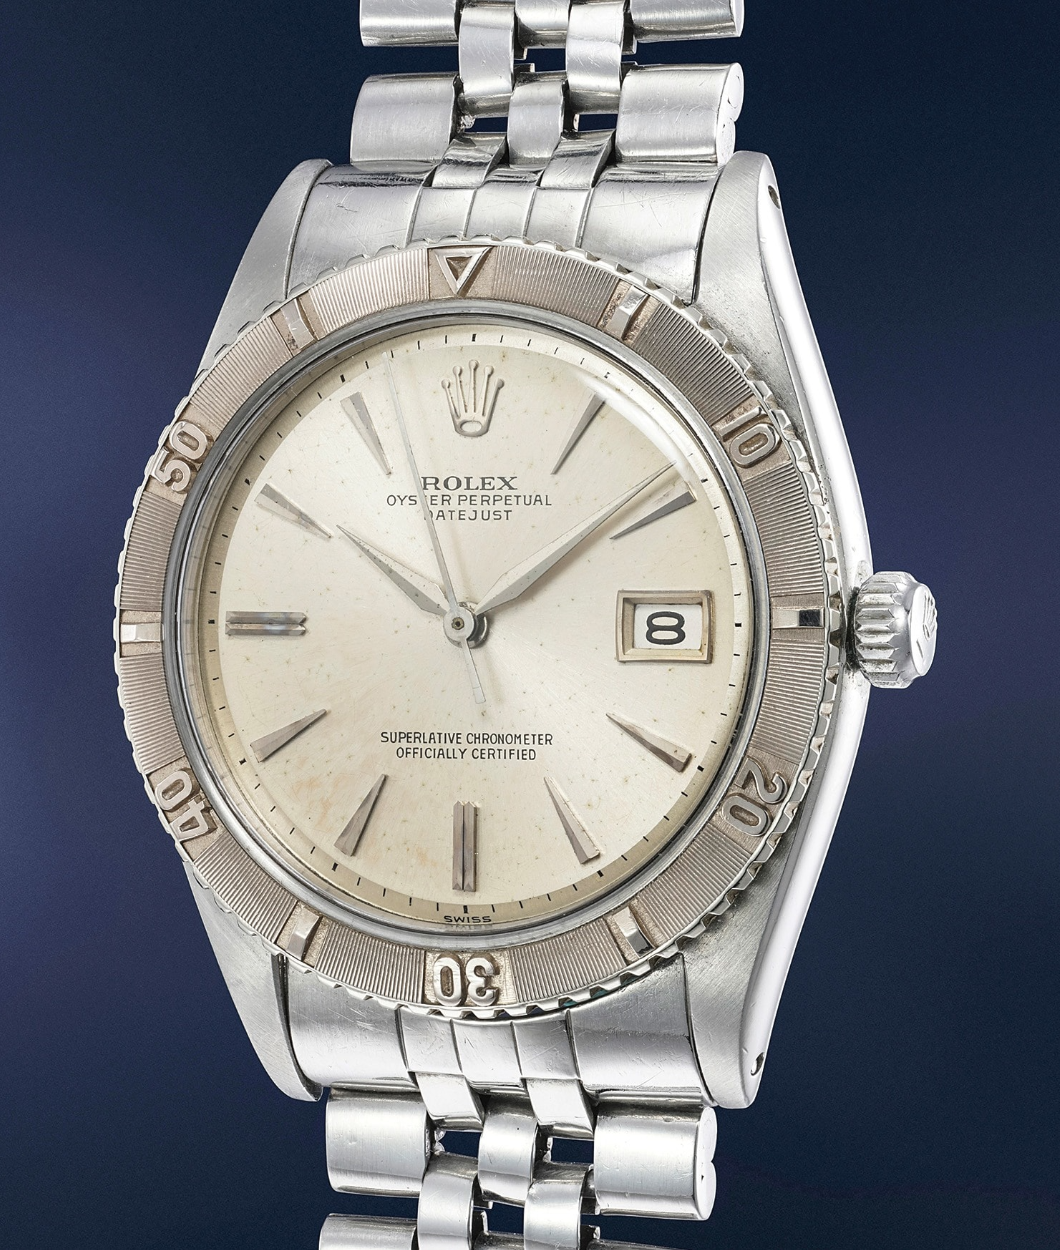 bargains at Phillips Geneva Watch Auction XII